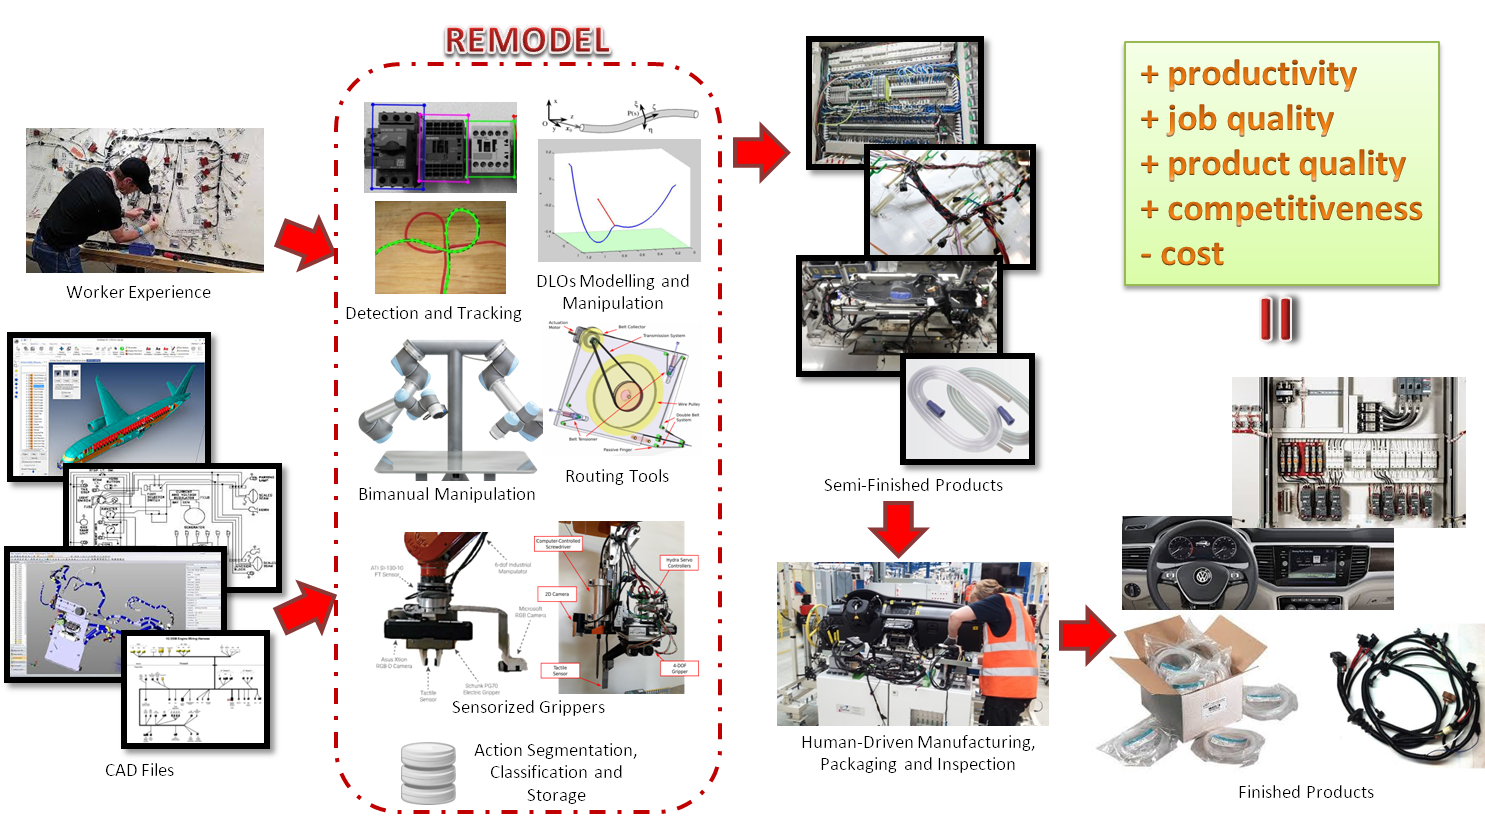 REMODEL - Robotic tEchnologies for the Manipulation of cOmplex DeformablE Linear objects